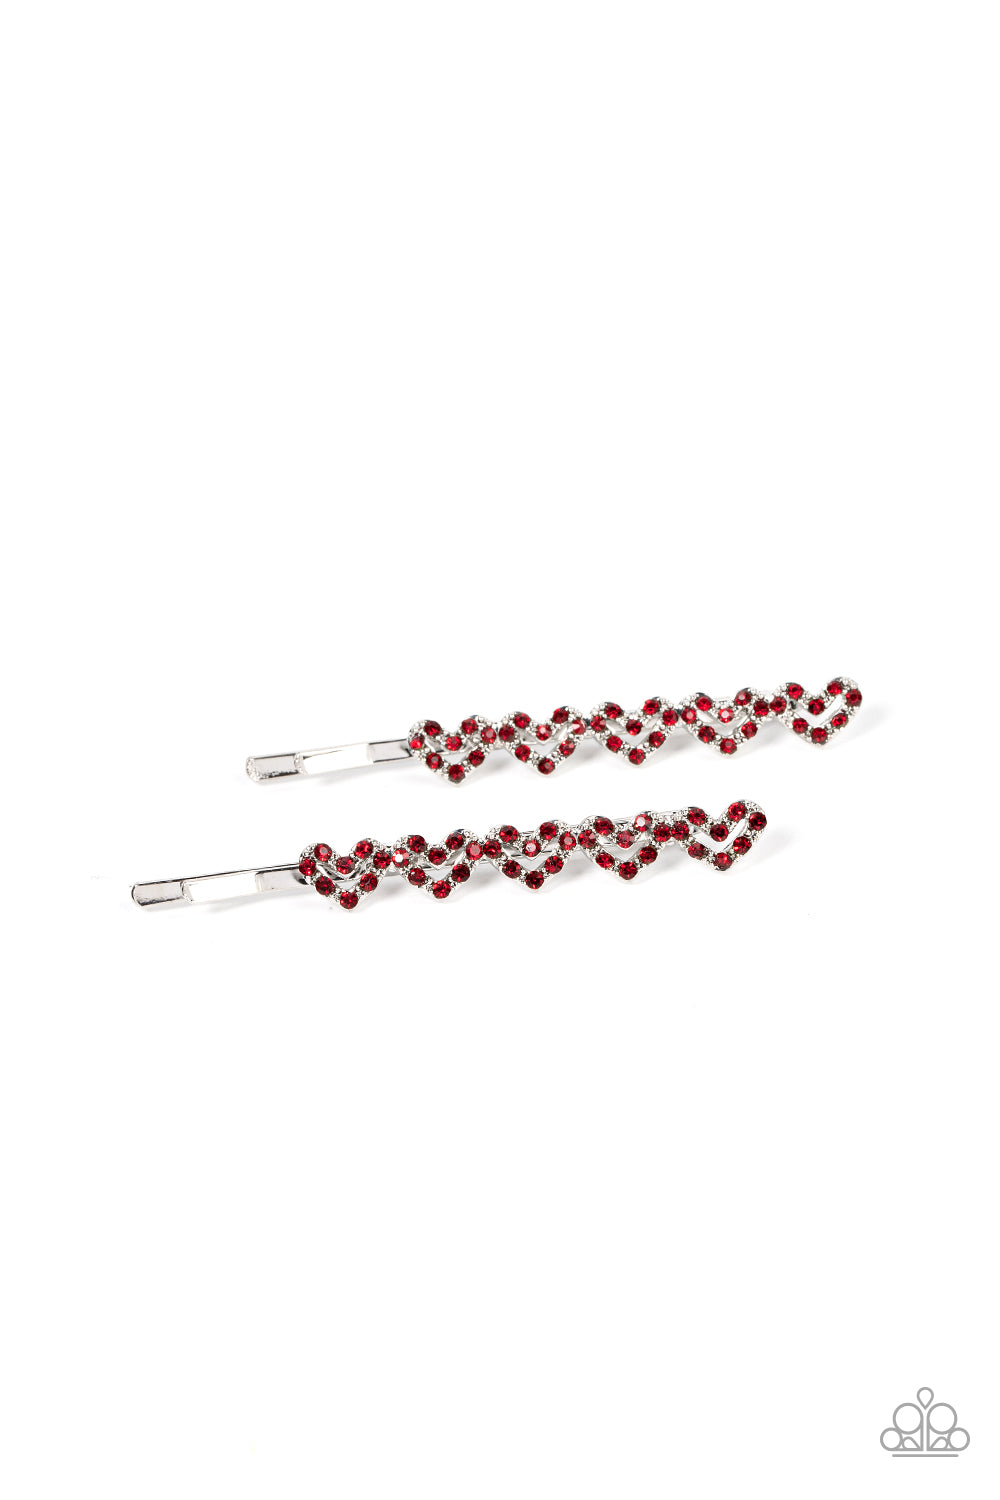 Paparazzi Hair Accessory - Thinking of You - Red Bobby Pins